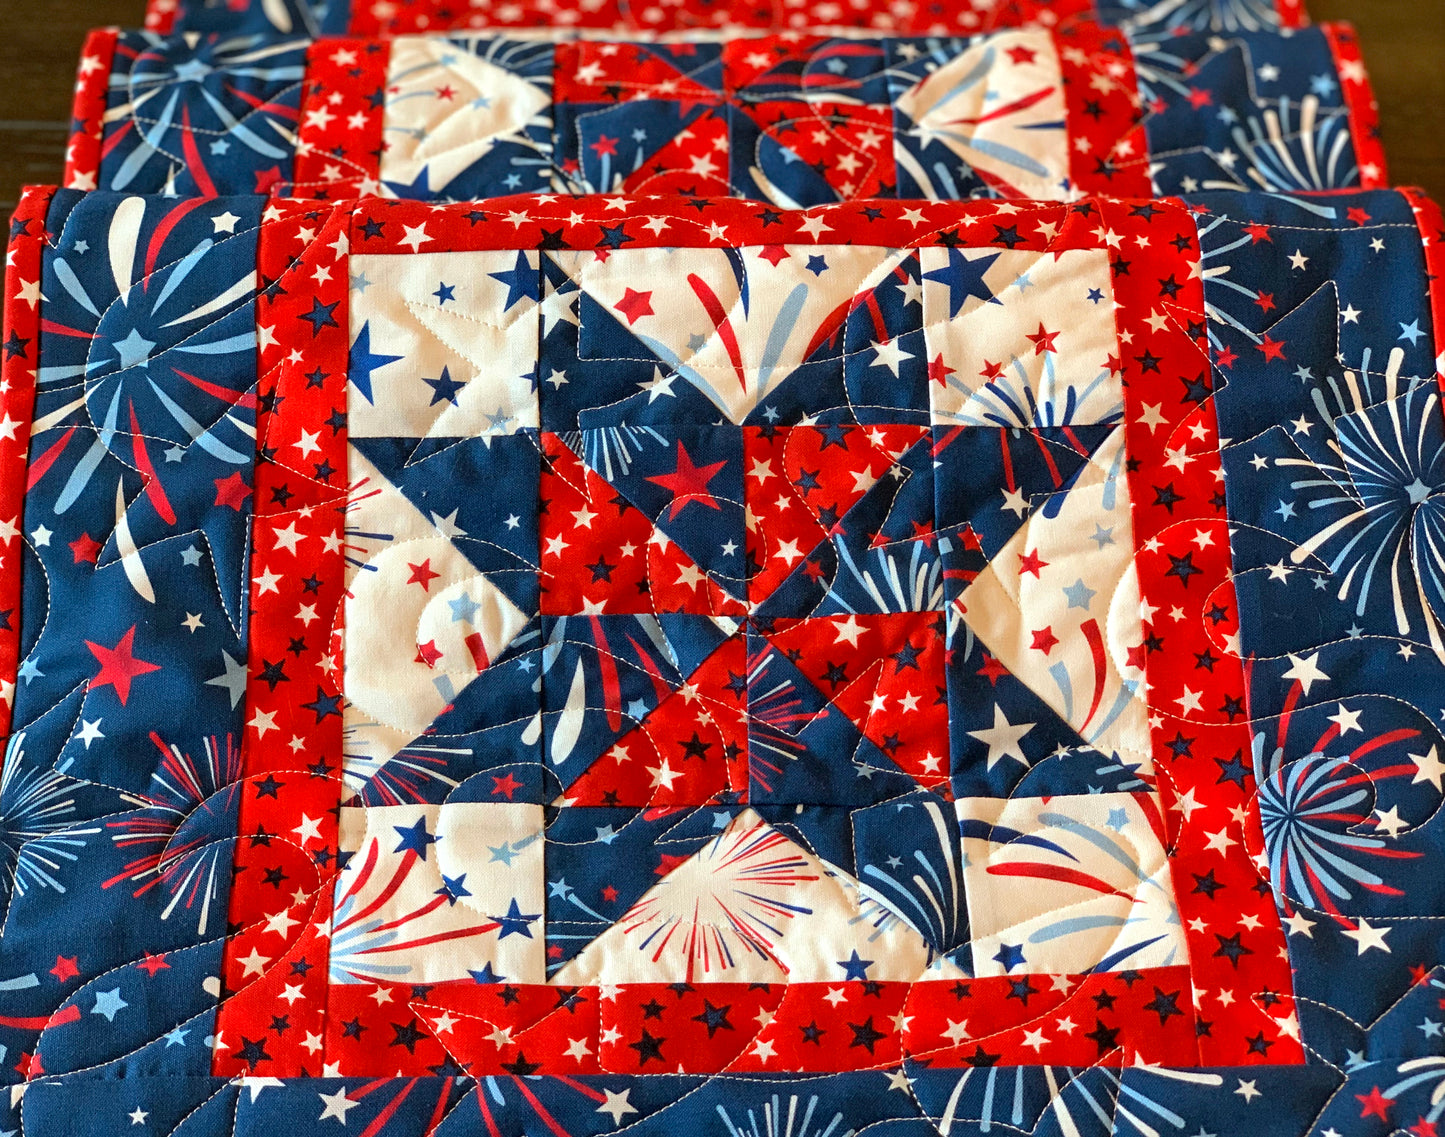 Close up of quilting on red white and blue patriotic table runner with four center star blocks that have a pinwheel in the center. The runner has red star sashing between the blocks and a blue fireworks border. 